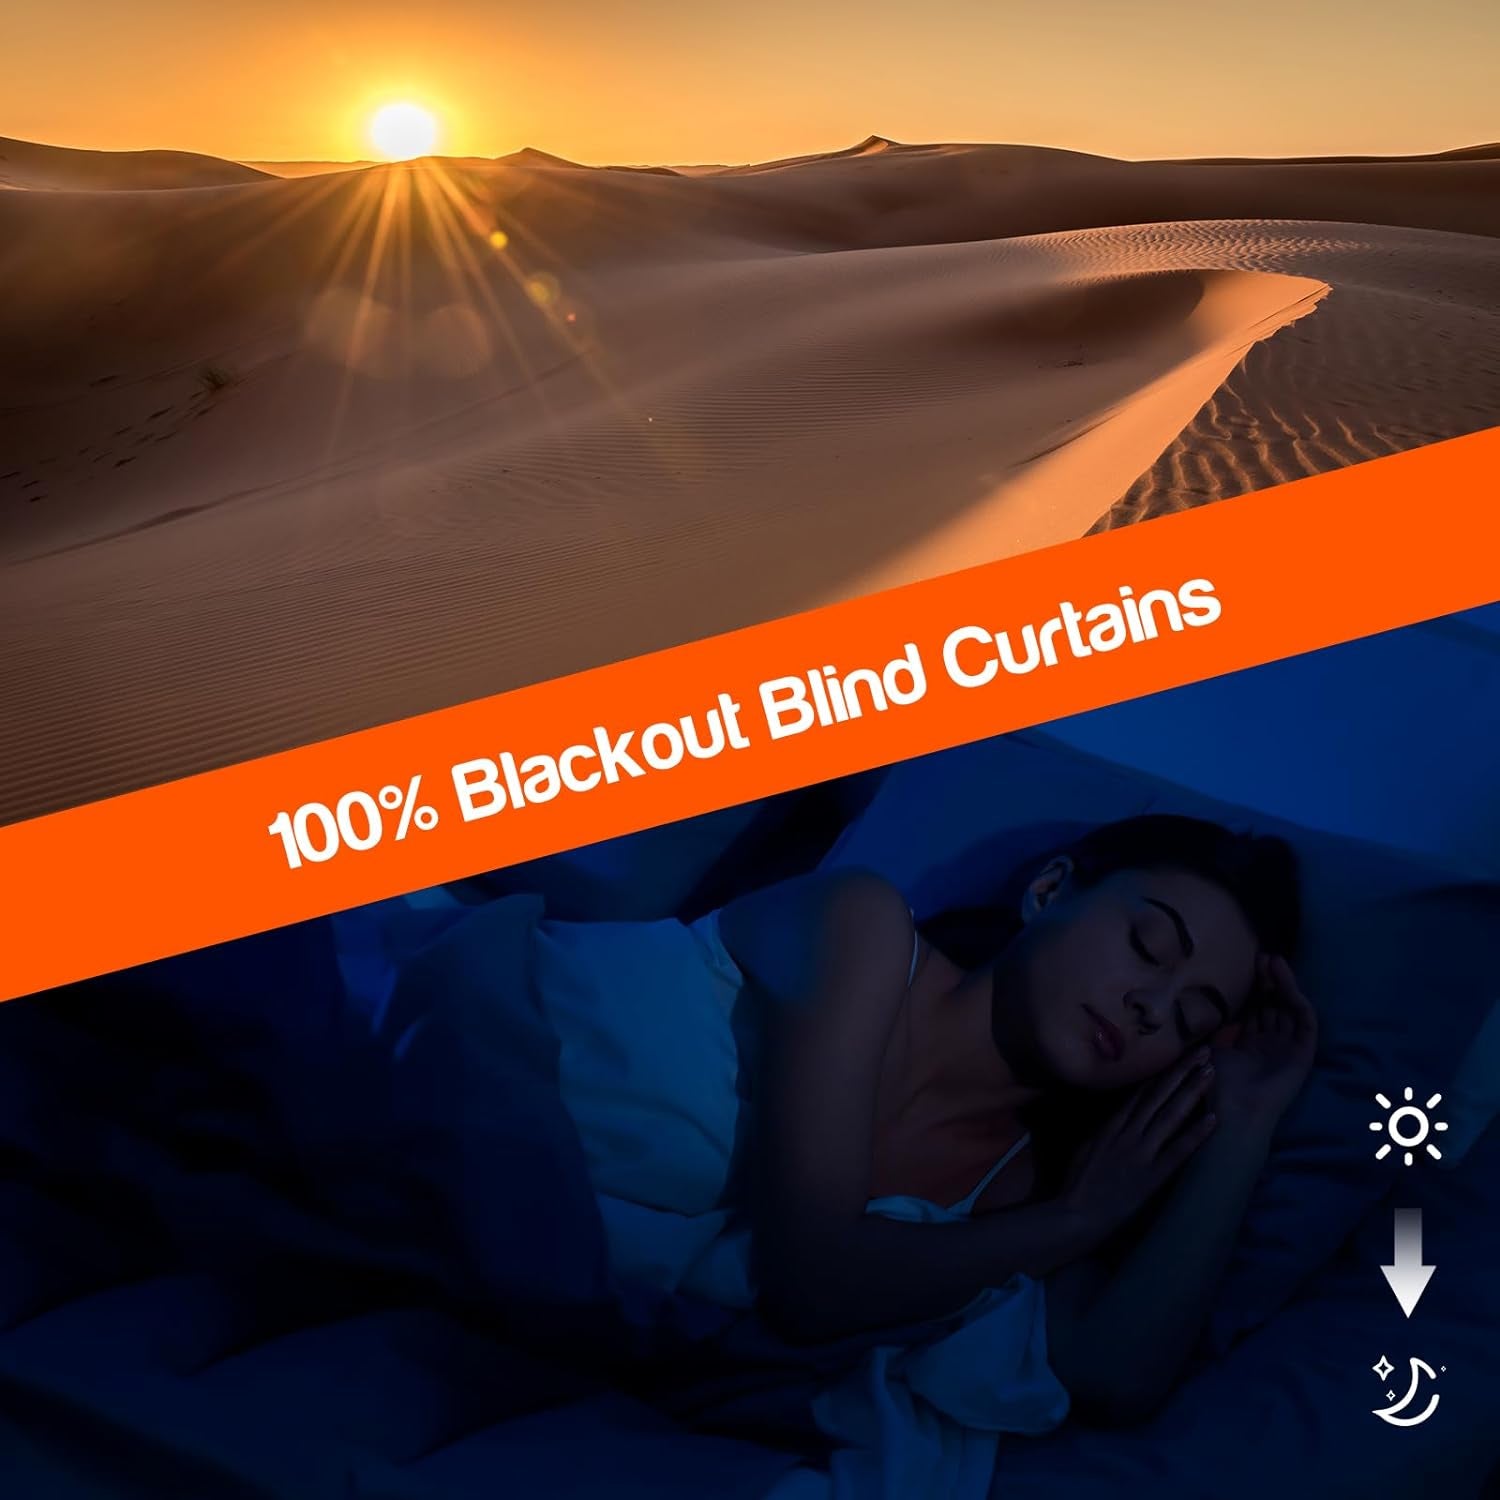 100% Blackout Curtains, No Drill Blackout Shades (79"X 58"), with Hook and Loop Tape, Blackout Blinds, Black Out Curtains for Bedroom Windows, Baby Nursery, Dorm Room, Office or Travel Use  Suzhou Aishang Outdoor Products Co.,Ltd   